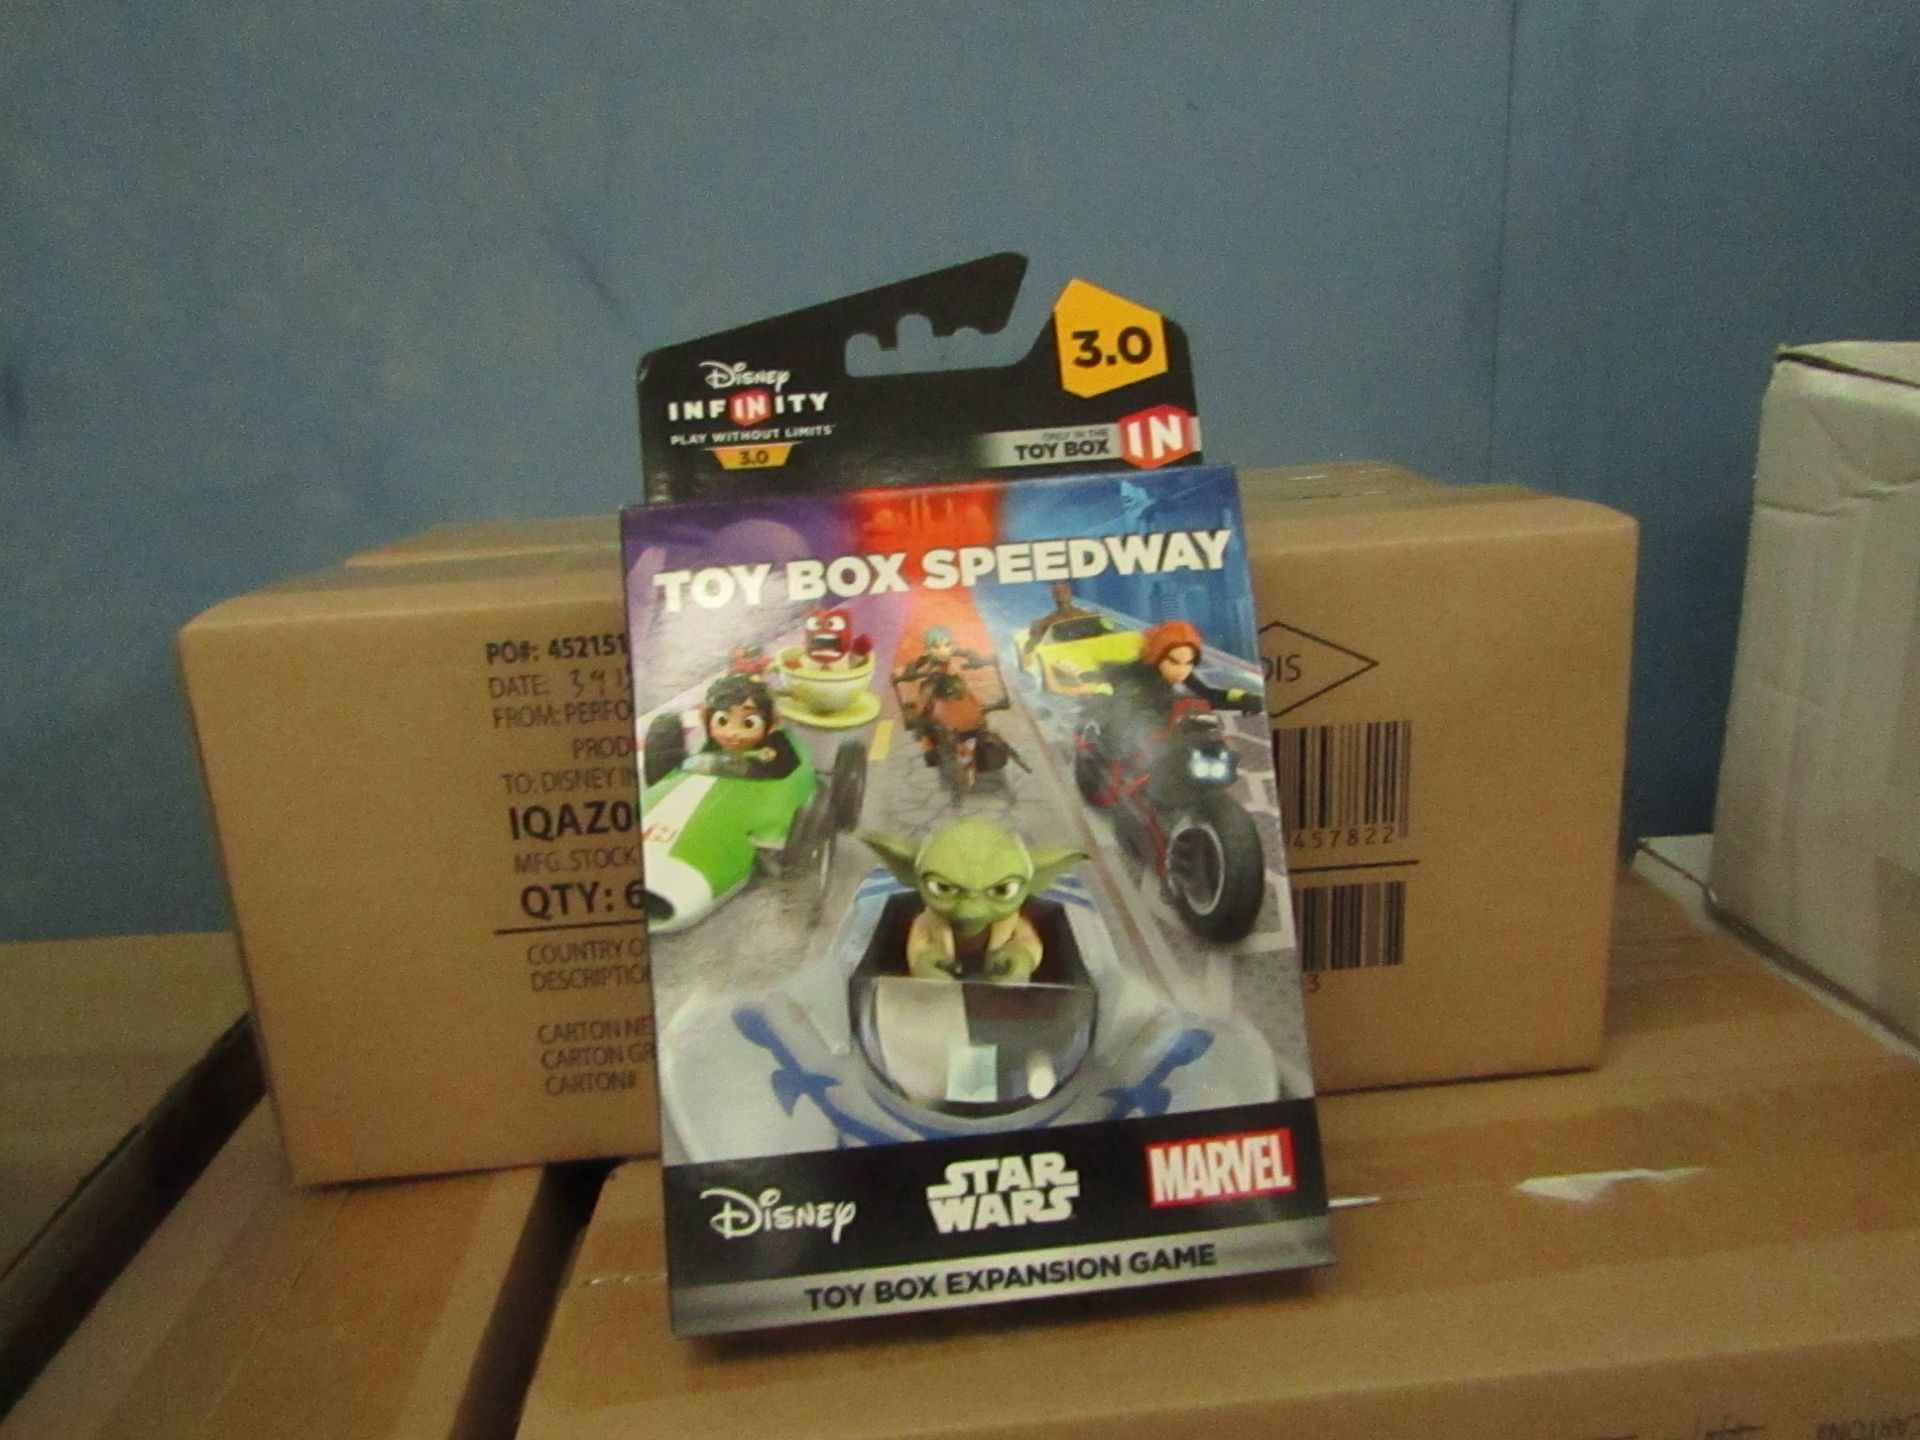 6x Disney - Infinity Toy Box Speedway Expansion Game - New & Boxed.